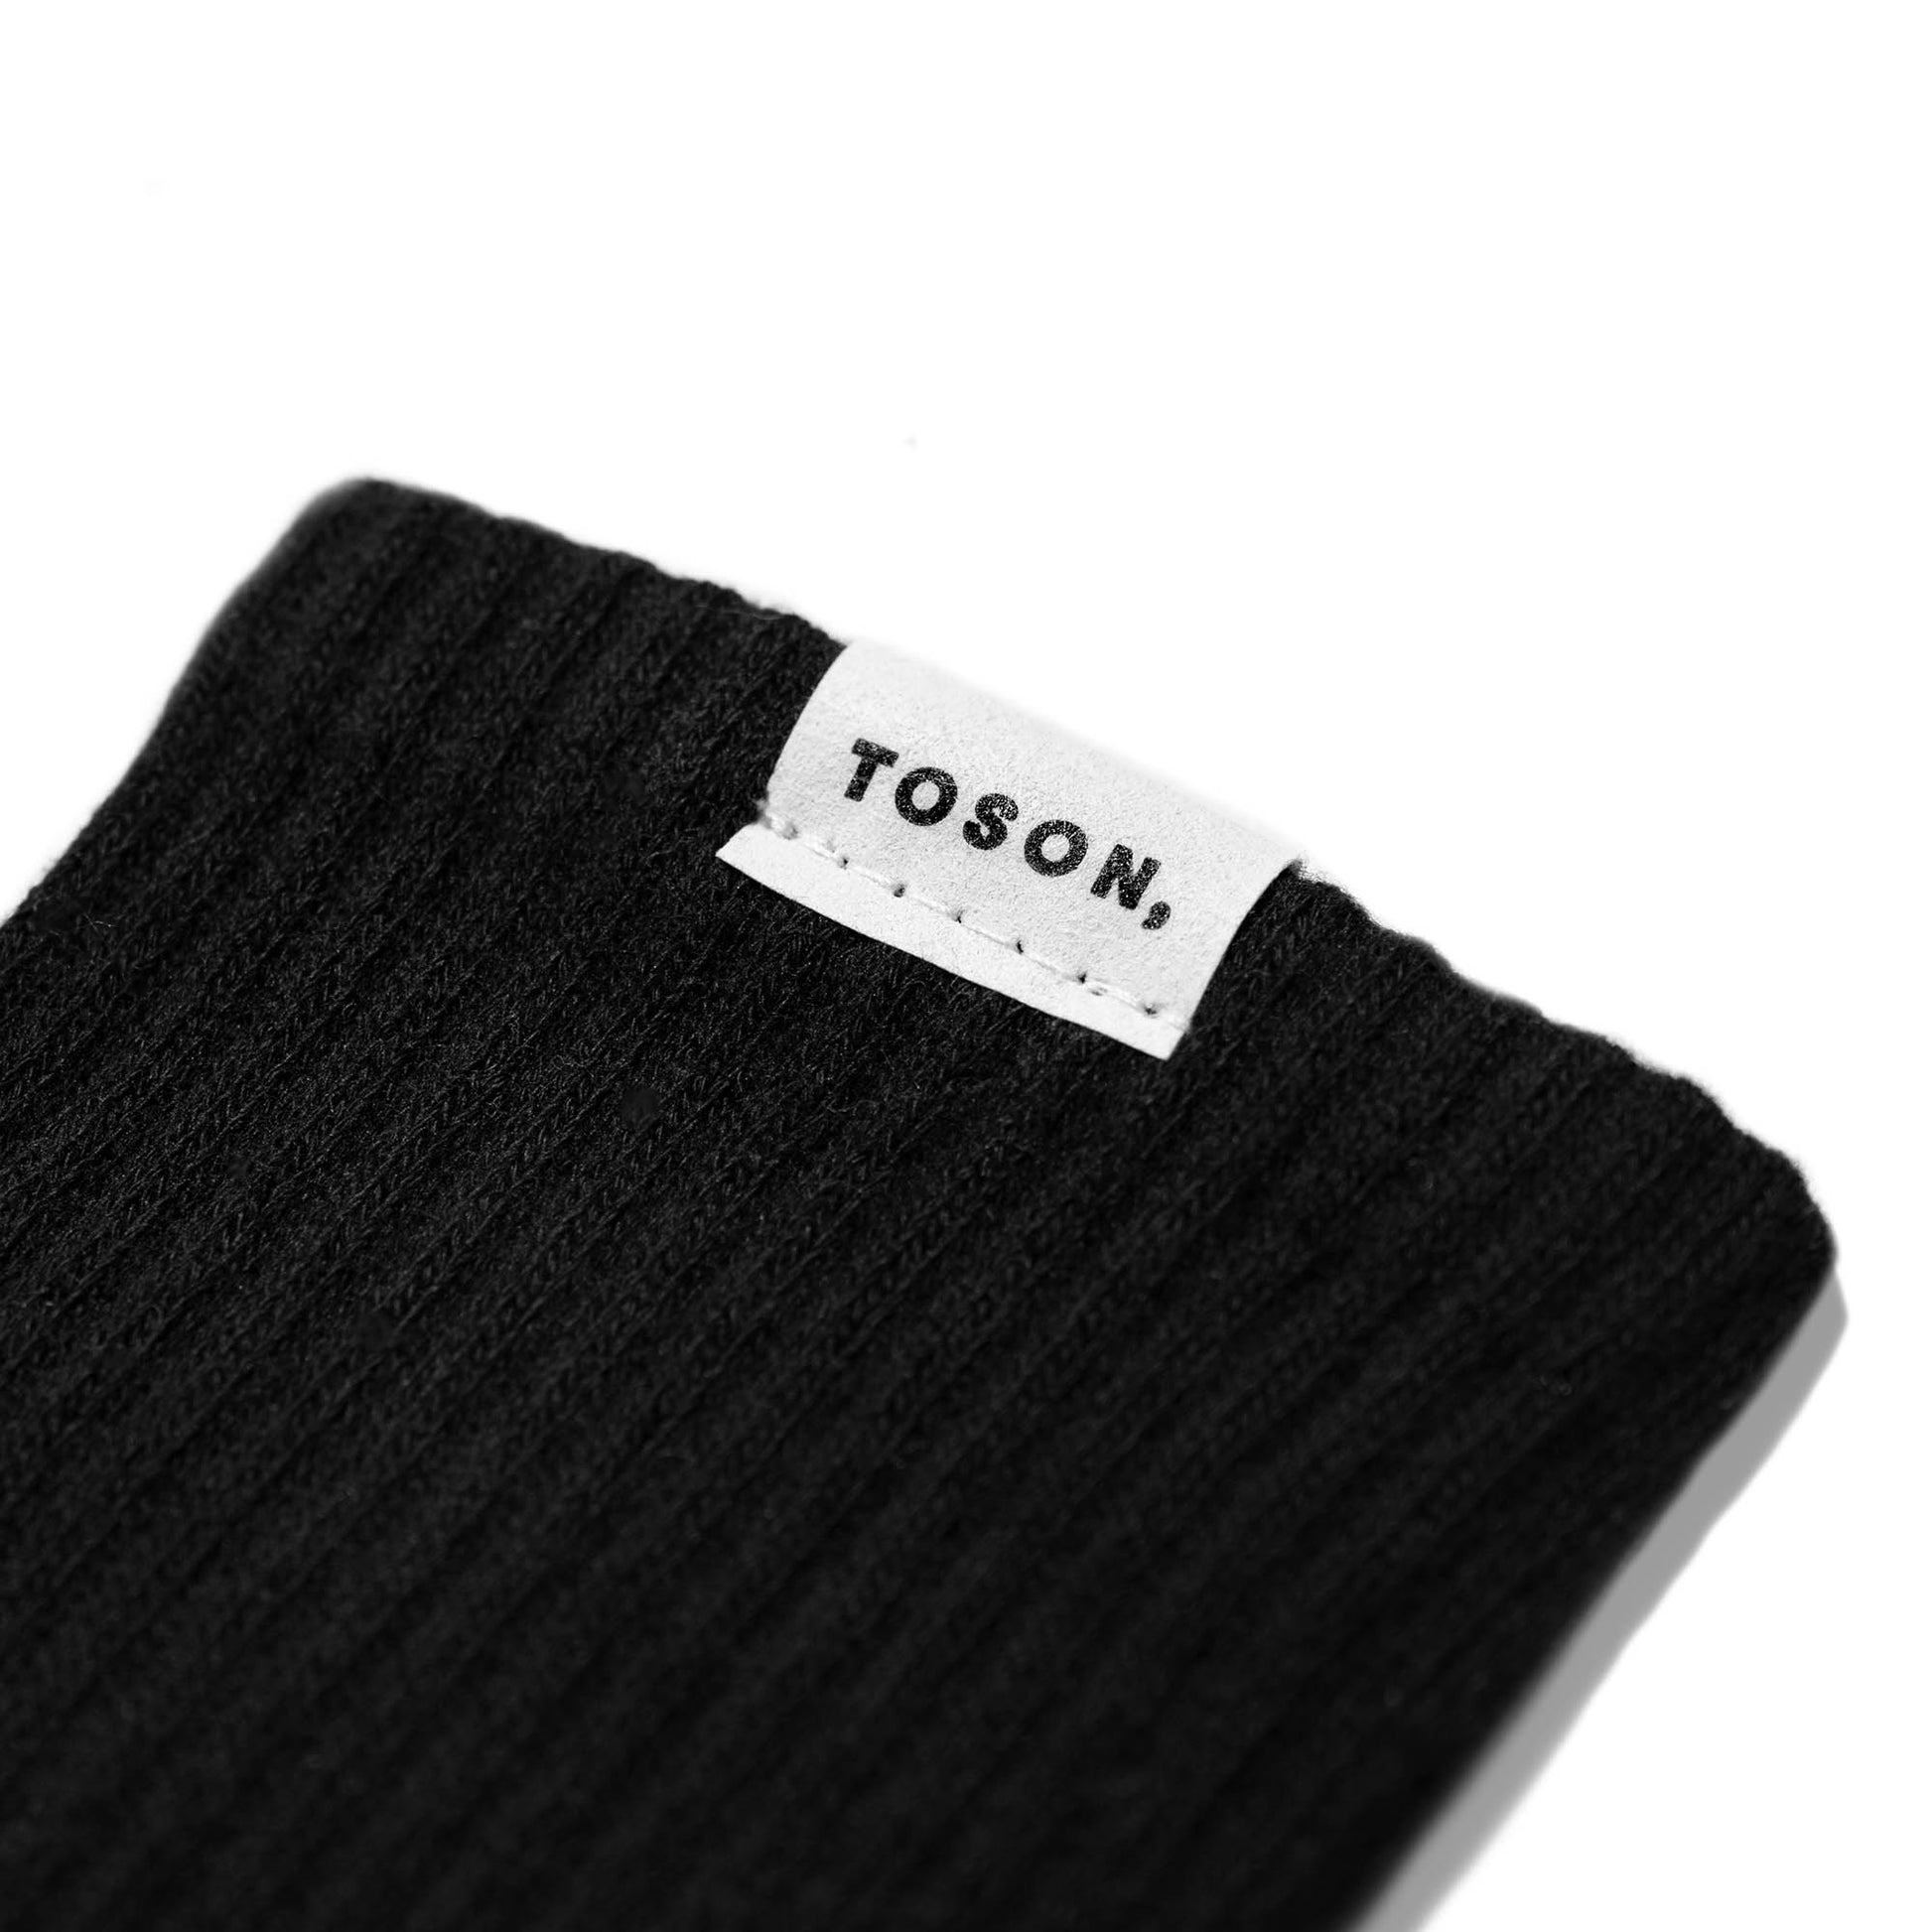 Toson, Inflatable Socks 2 Pack in Black + Army Green